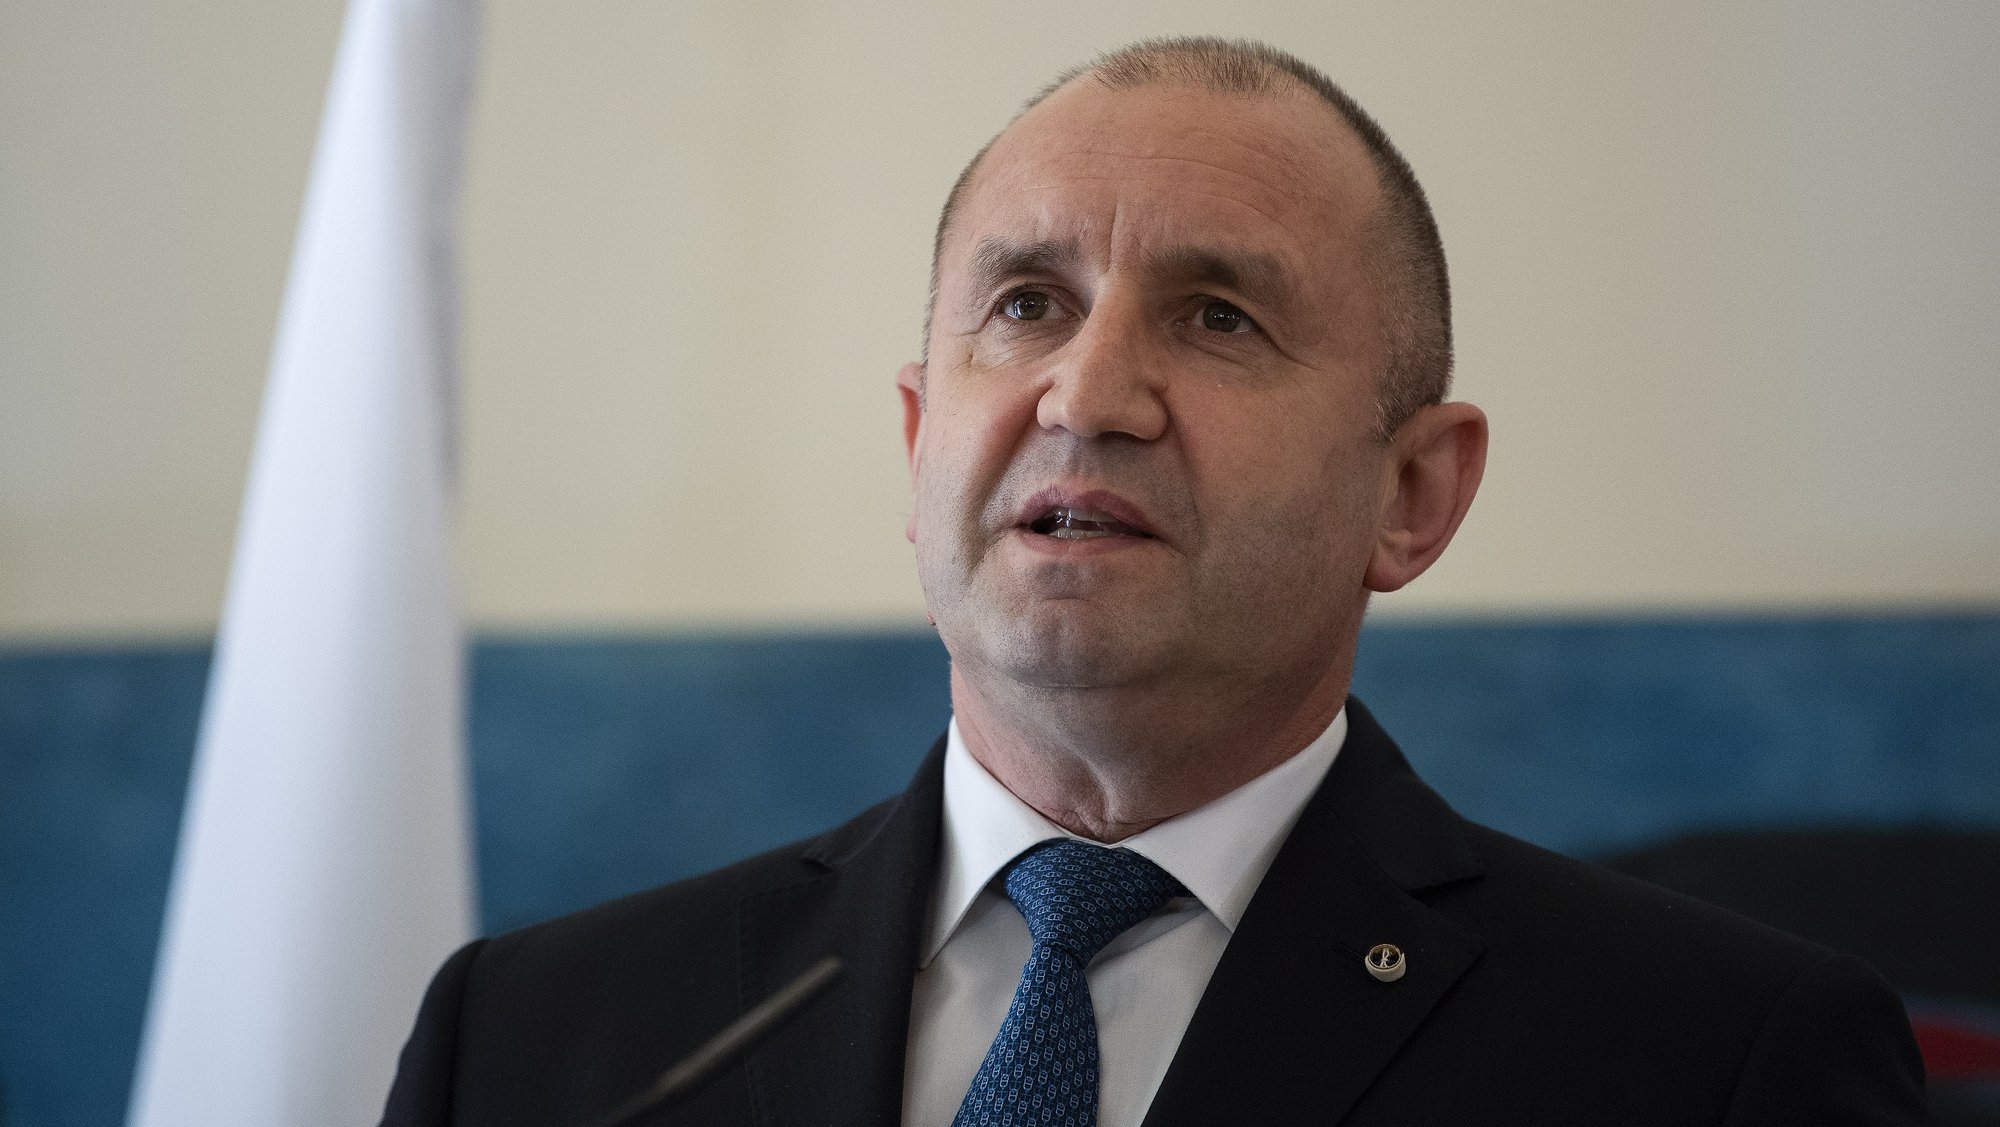 Bulgaria&#039;s President Rumen Radev during a press conference with his Portuguese counterpart, Marcelo Rebelo de Sousa (not in the picture), following the visit to Serralves Museum, Porto, Portugal, 12 April 2022. The President of the Republic of Bulgaria will pay an official visit to Portugal on Tuesday and Wednesday, starting in Porto. RUI MANUEL FARINHA/LUSA